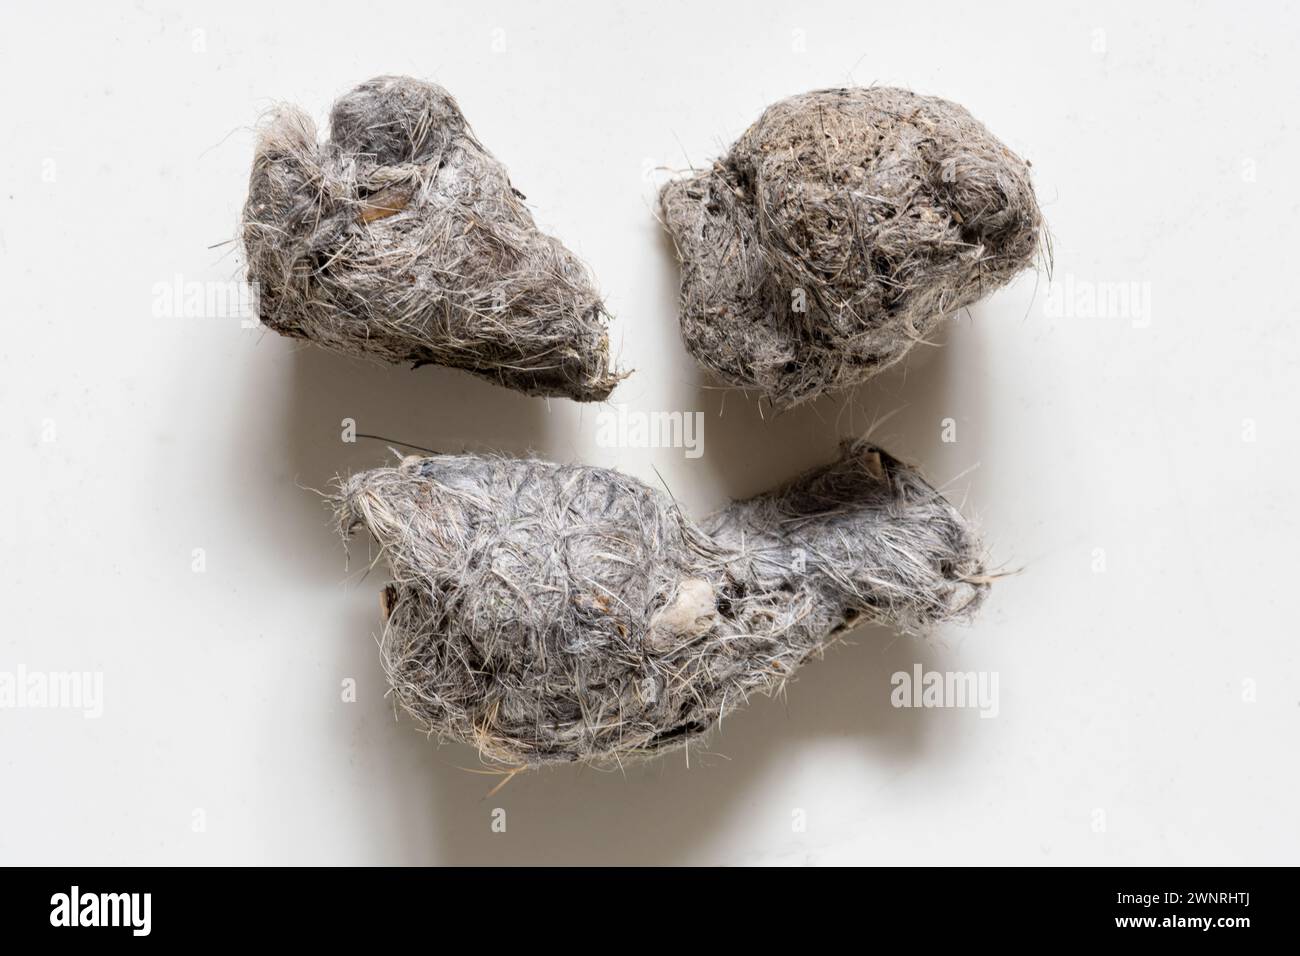 Tawny owl pellets (Strix aluco), regurgitated pellet containing undigested parts of food such as fur and bones, England, UK Stock Photo